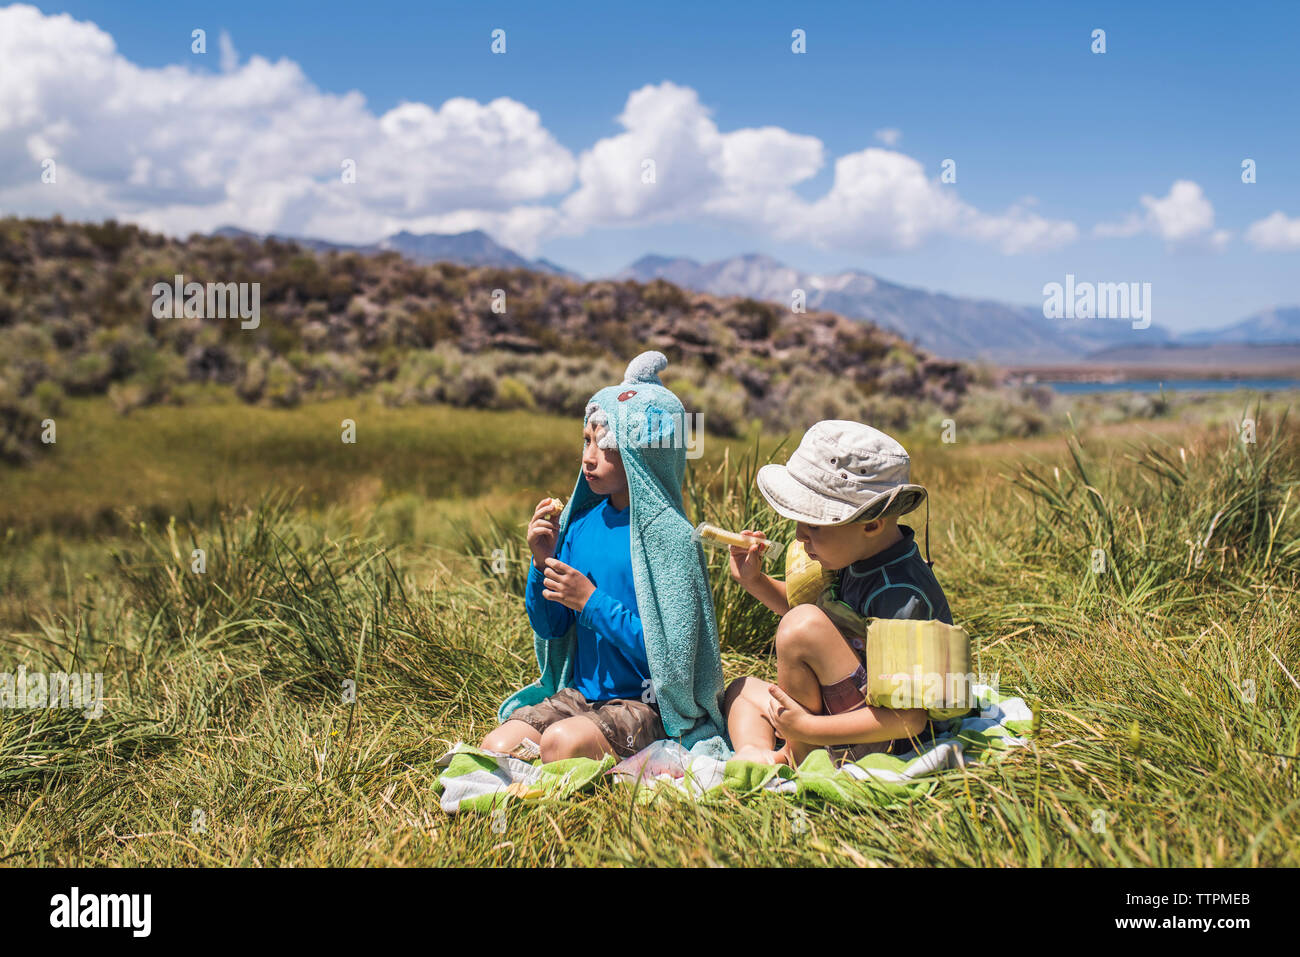 Carefree brothers sitting on grassy field during sunny day Stock Photo